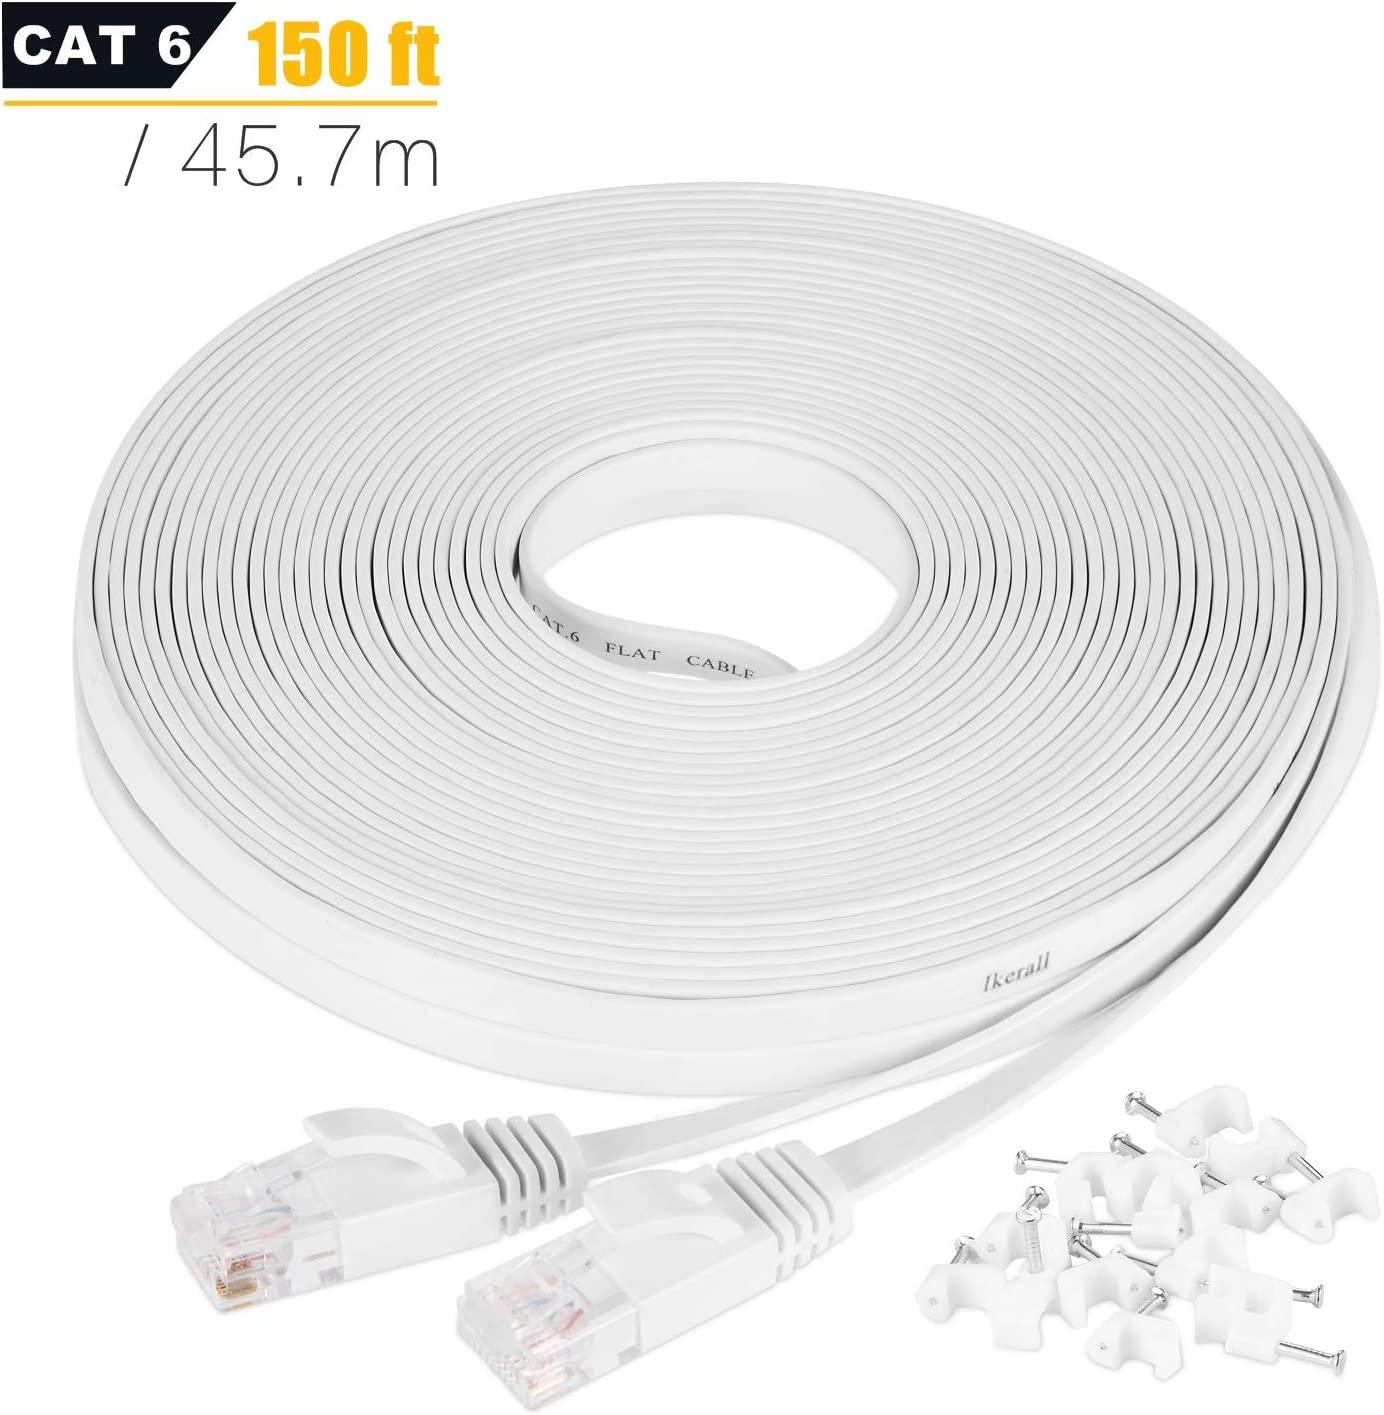 Ikerall, Ethernet Cable, 45M / 150ft Cat6 White Flat Network Internet Cord with Cable Clips - Ikerall RJ45 Connector High Speed Internet Cable 45 Meters (Faster Than Cat5e Cat5)